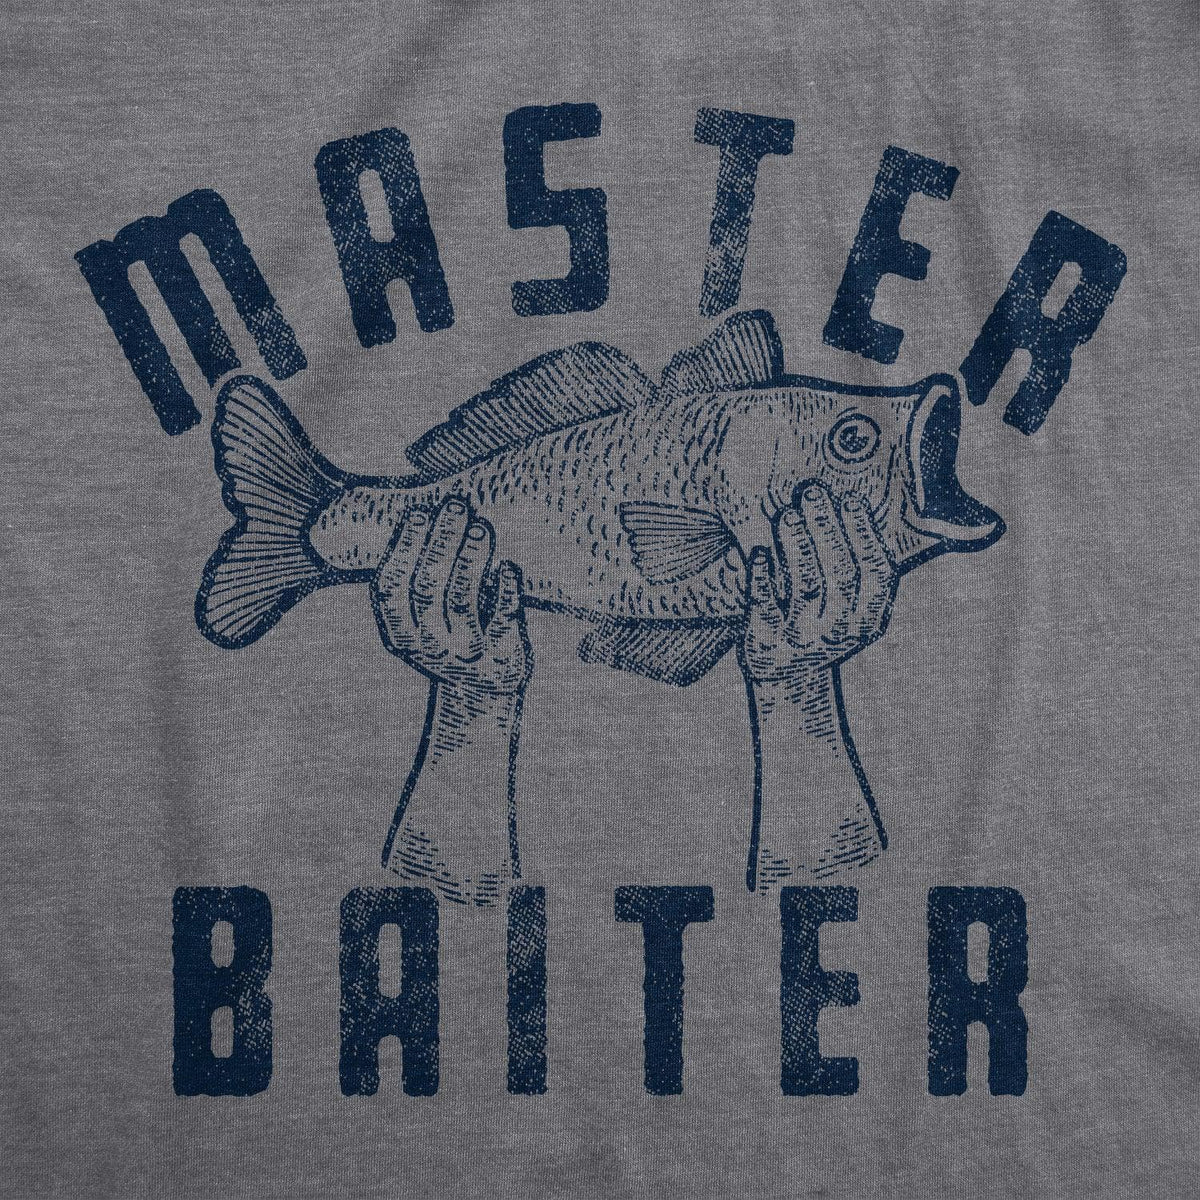 Crazy Dog T-shirts Mens Master Baiter Tshirt Funny Fishing Fathers Day Sarcastic Sexual Innuendo Graphic Tee Graphic Tees, Men's, Size: Small, Gray